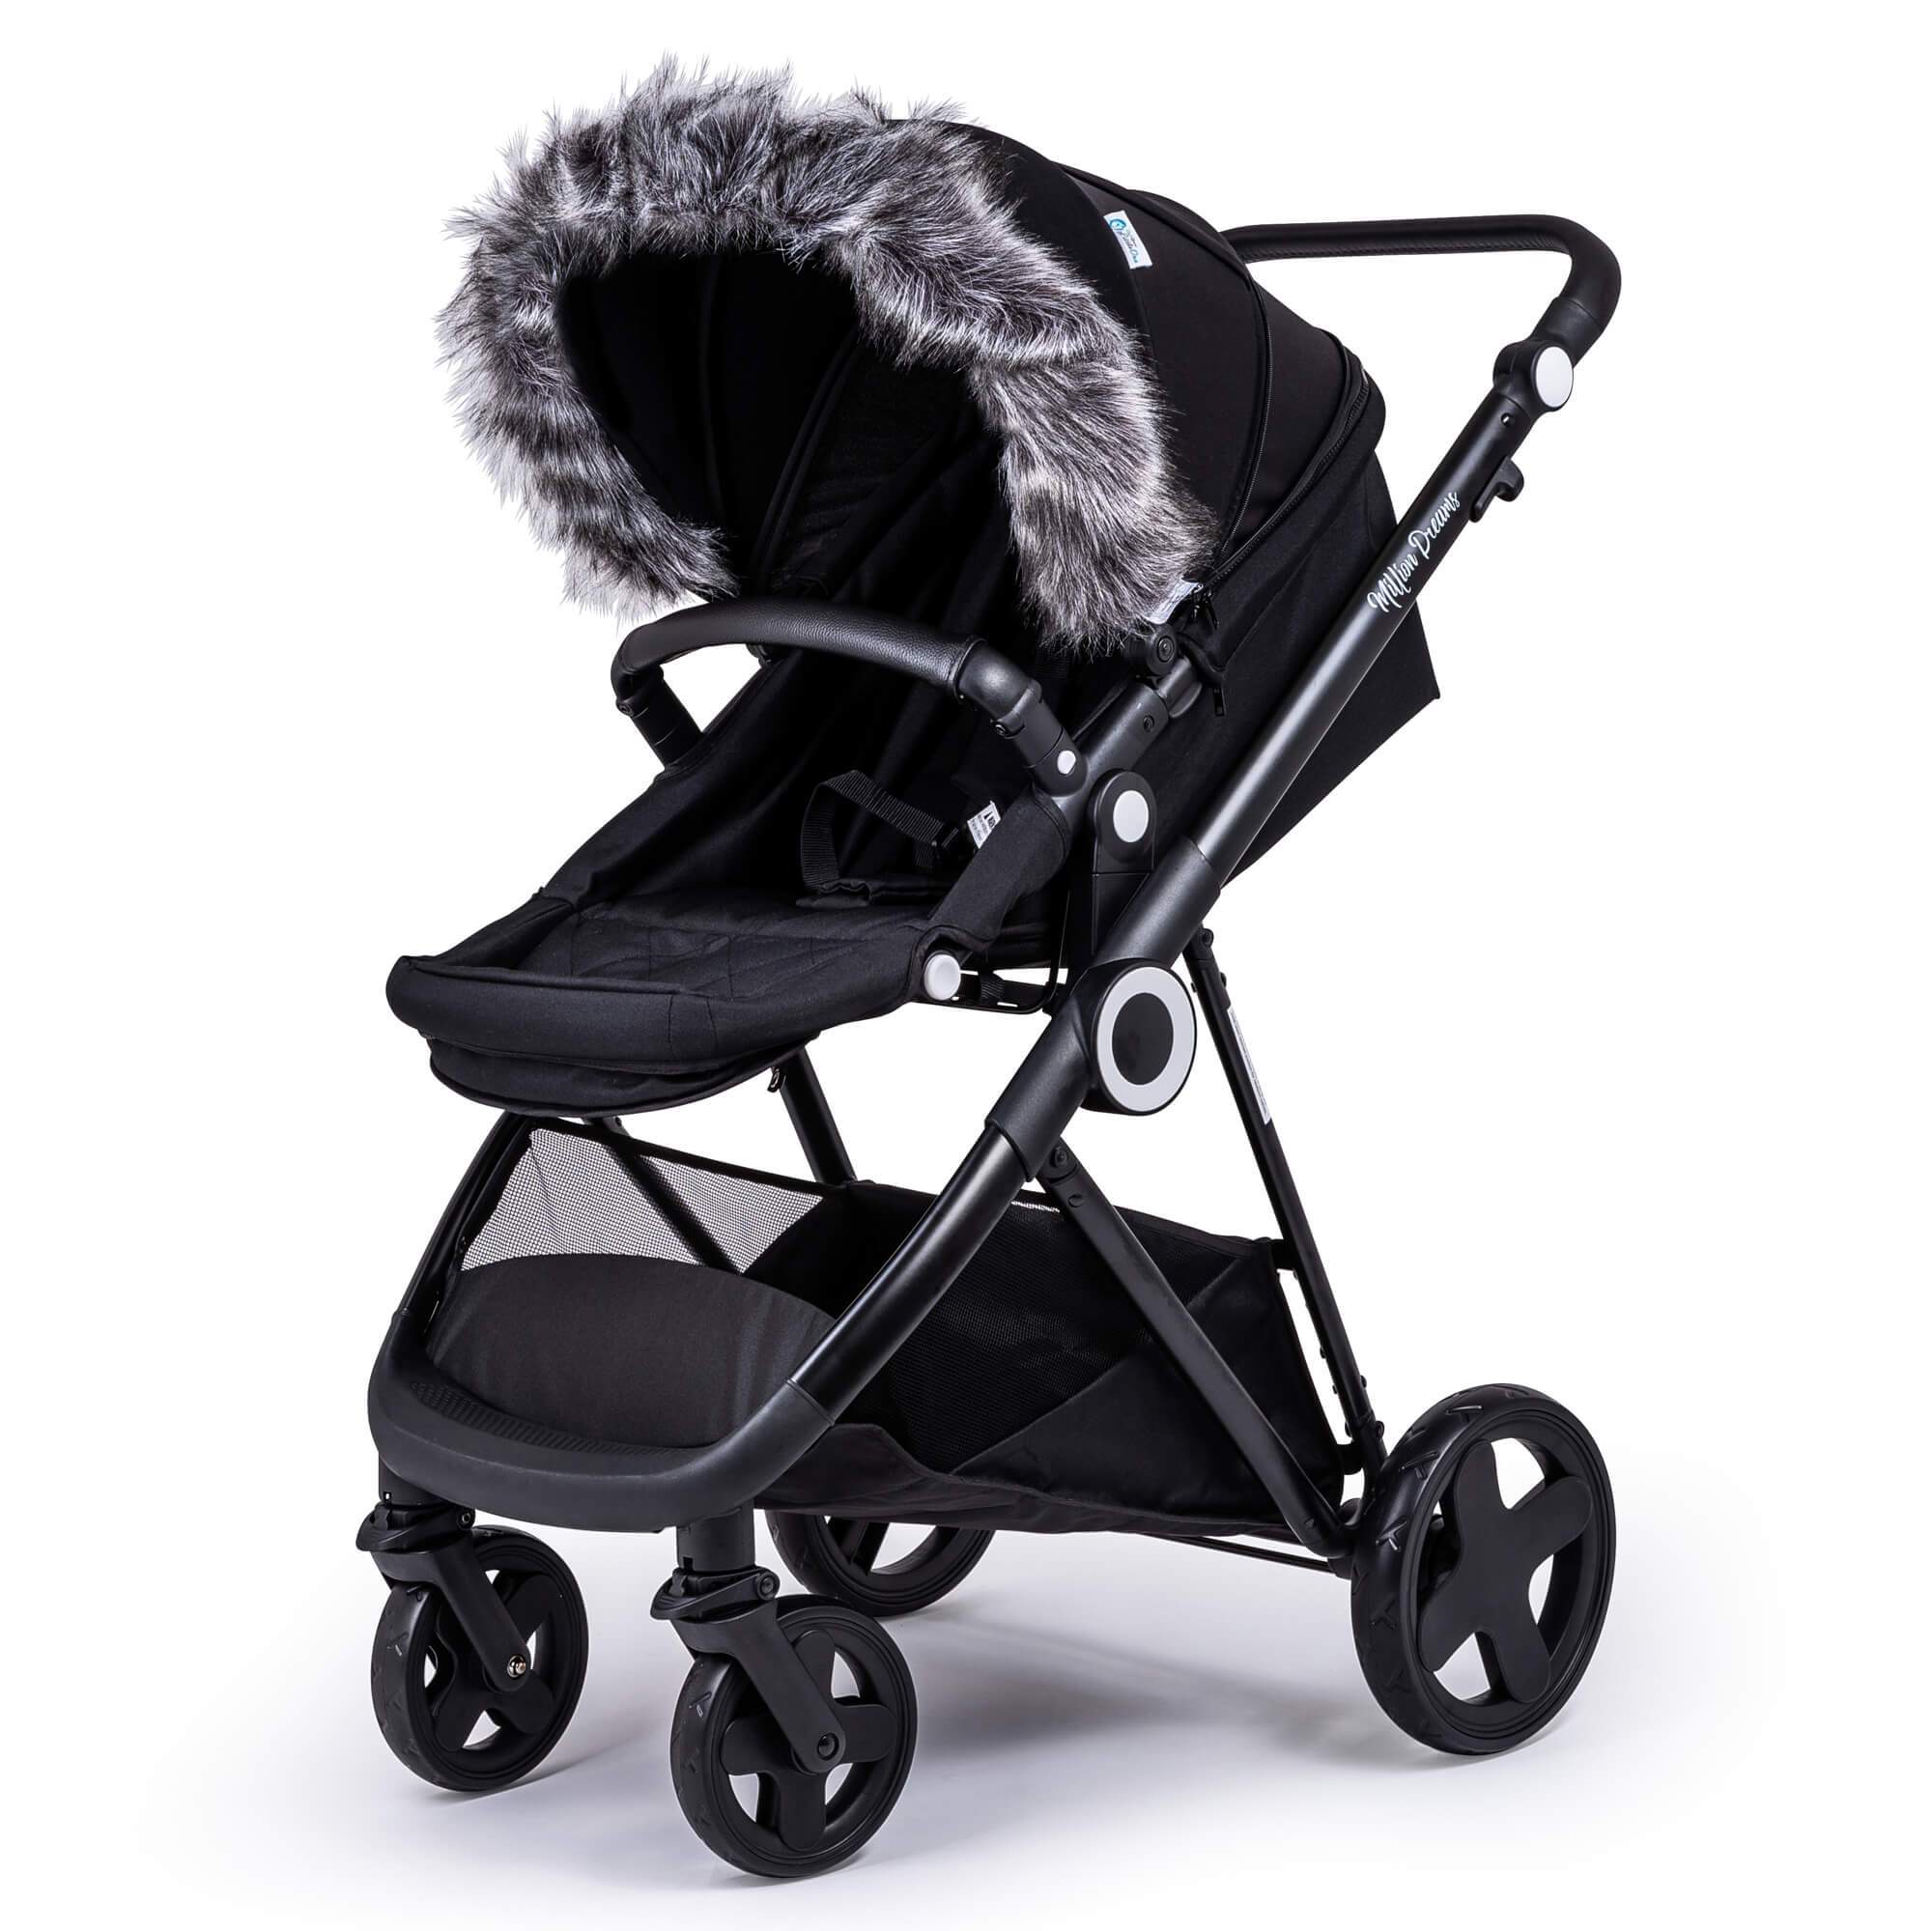 Pram Fur Hood Trim Attachment for Pushchair Compatible with Obaby - Dark Grey / Fits All Models | For Your Little One